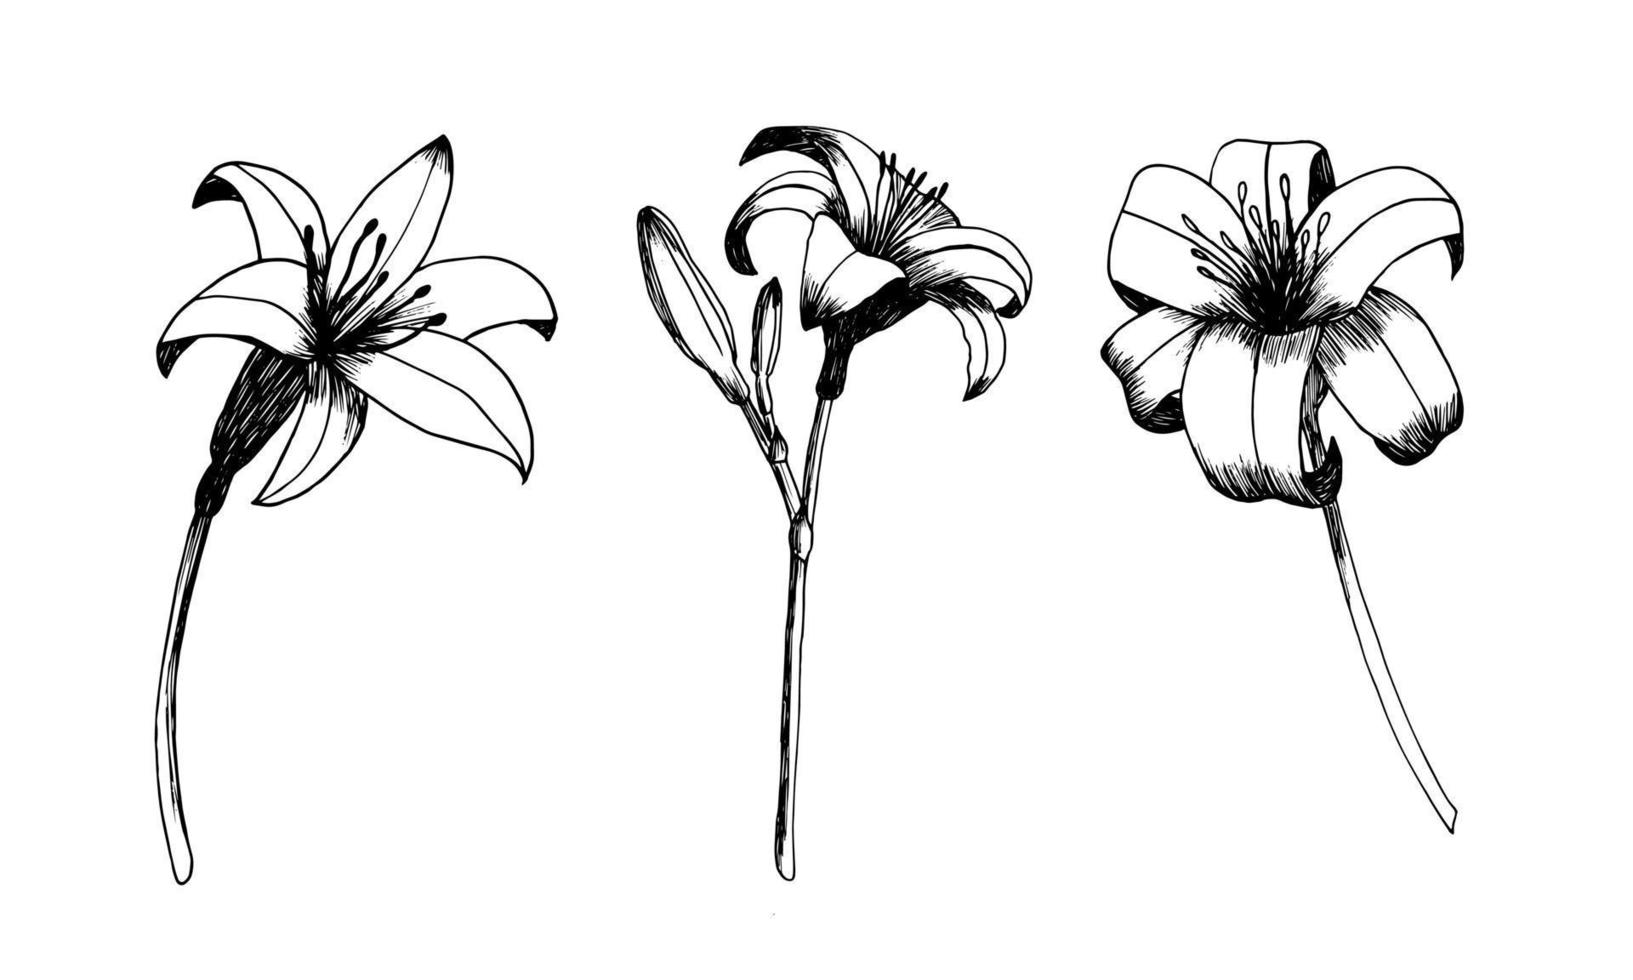 Daylily vector set. Hand drawn botanical lily sketch. Different kinds of day lilies isolated on white background. Realistic ink flower illustration.